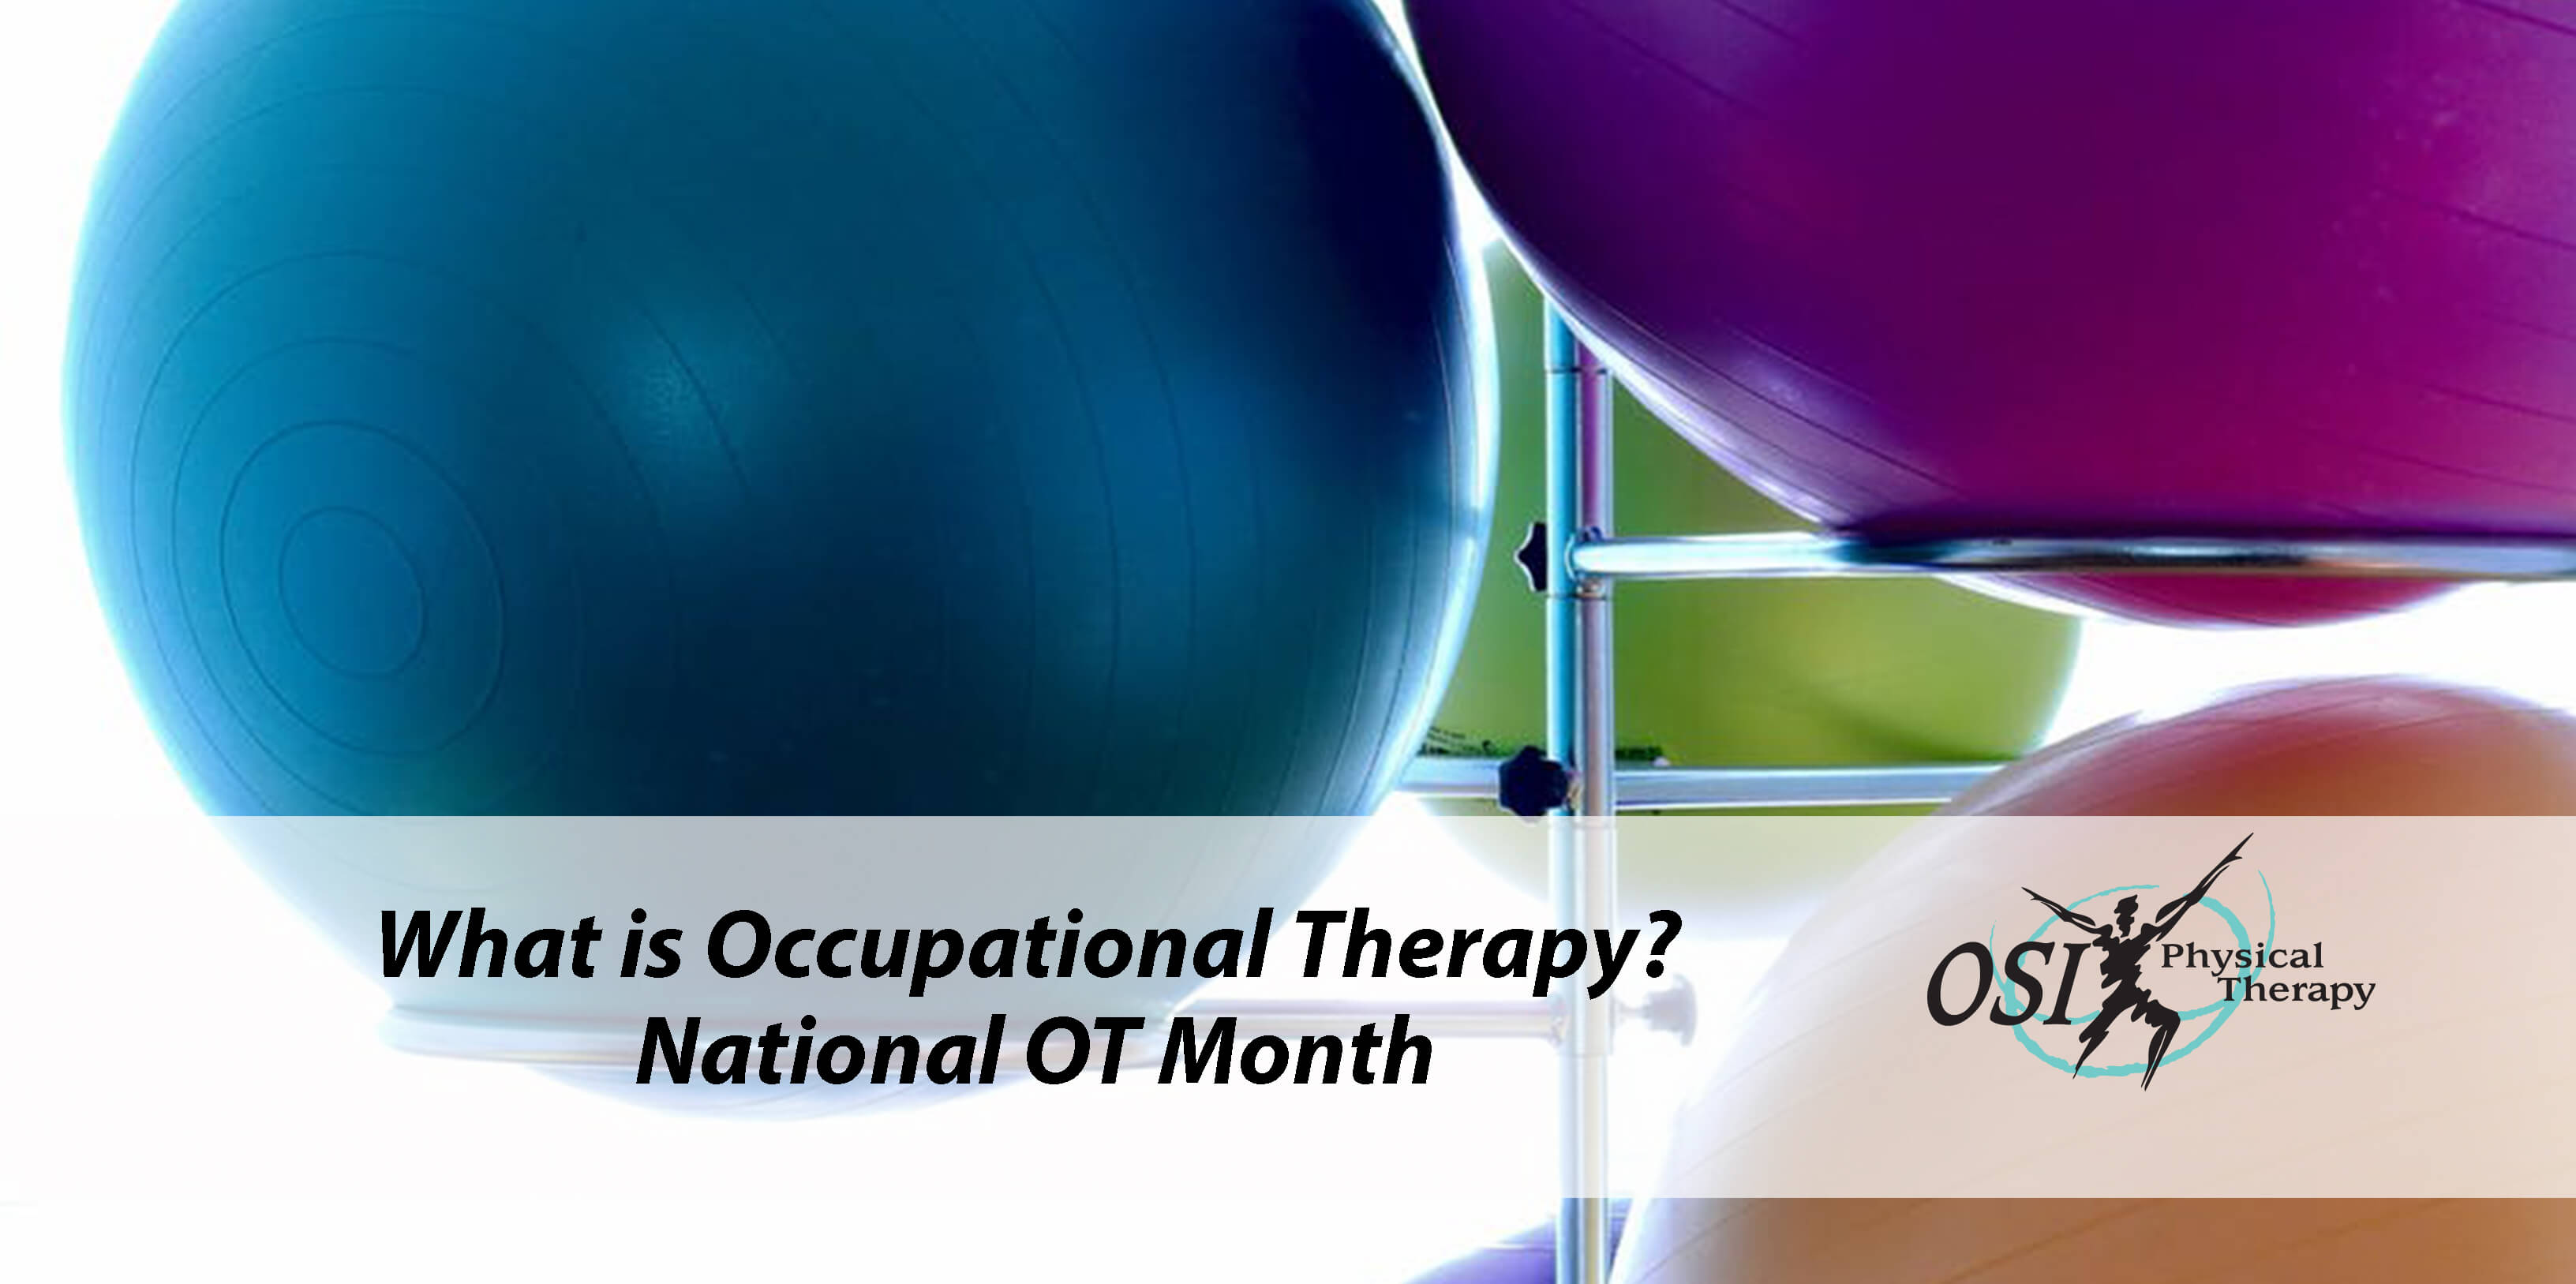 What is Occupational Therapy? National OT Month